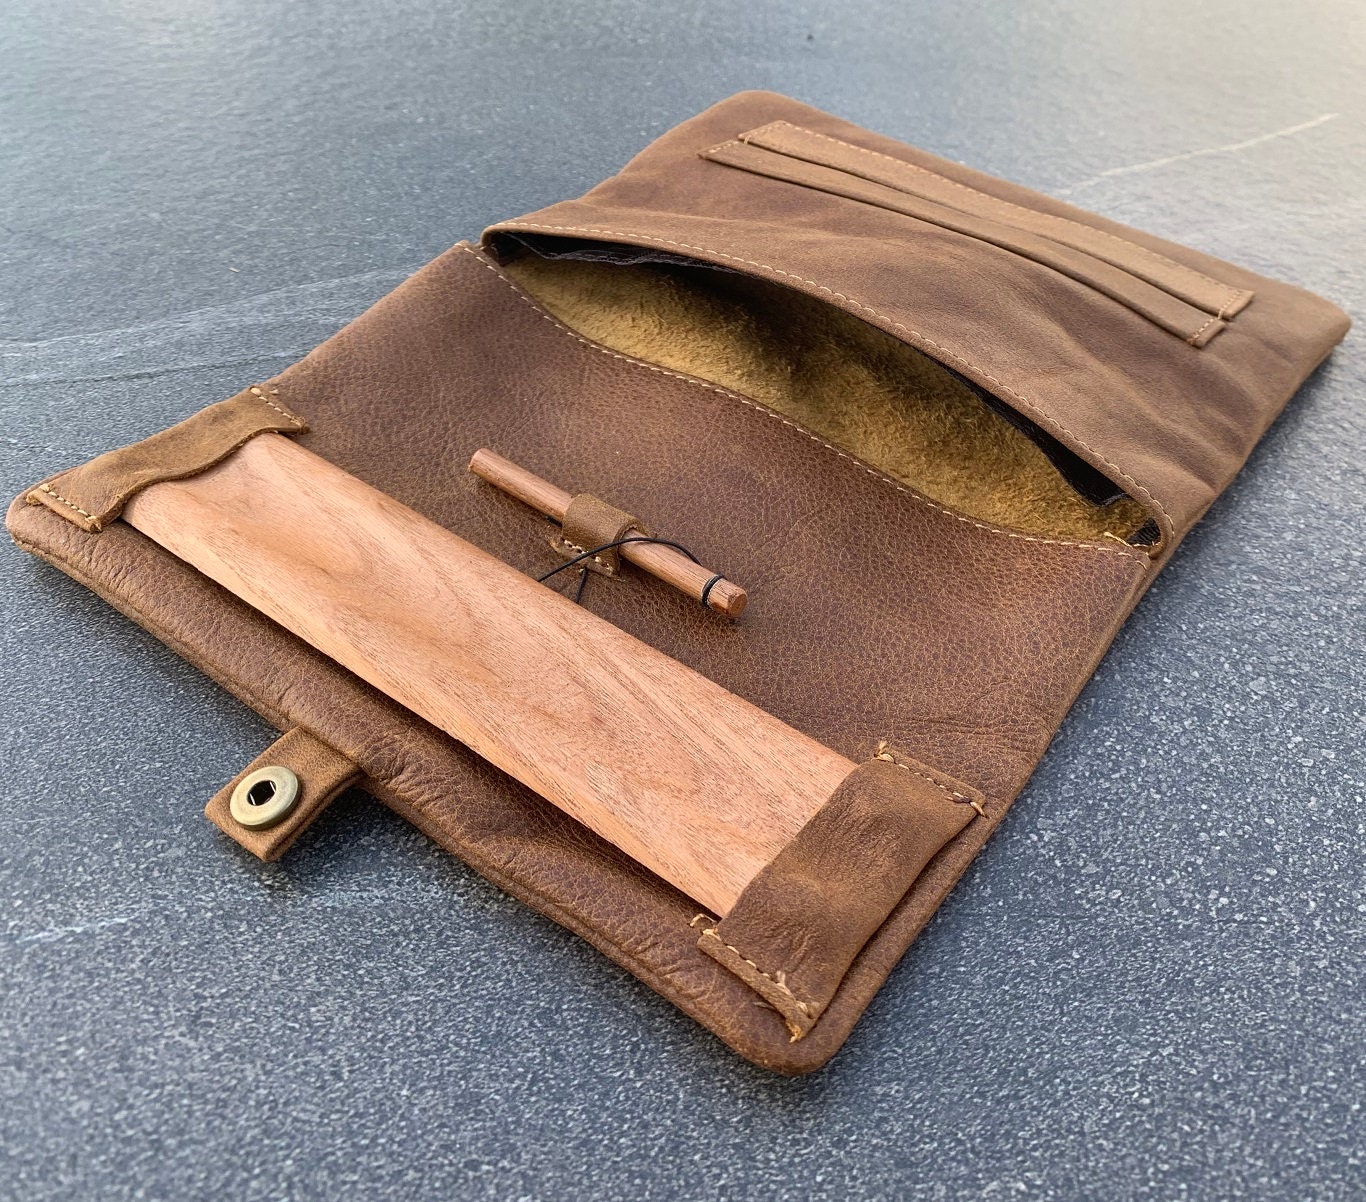 Handmade Leather Tobacco Pouch, Rolling Tobacco Case, Leather